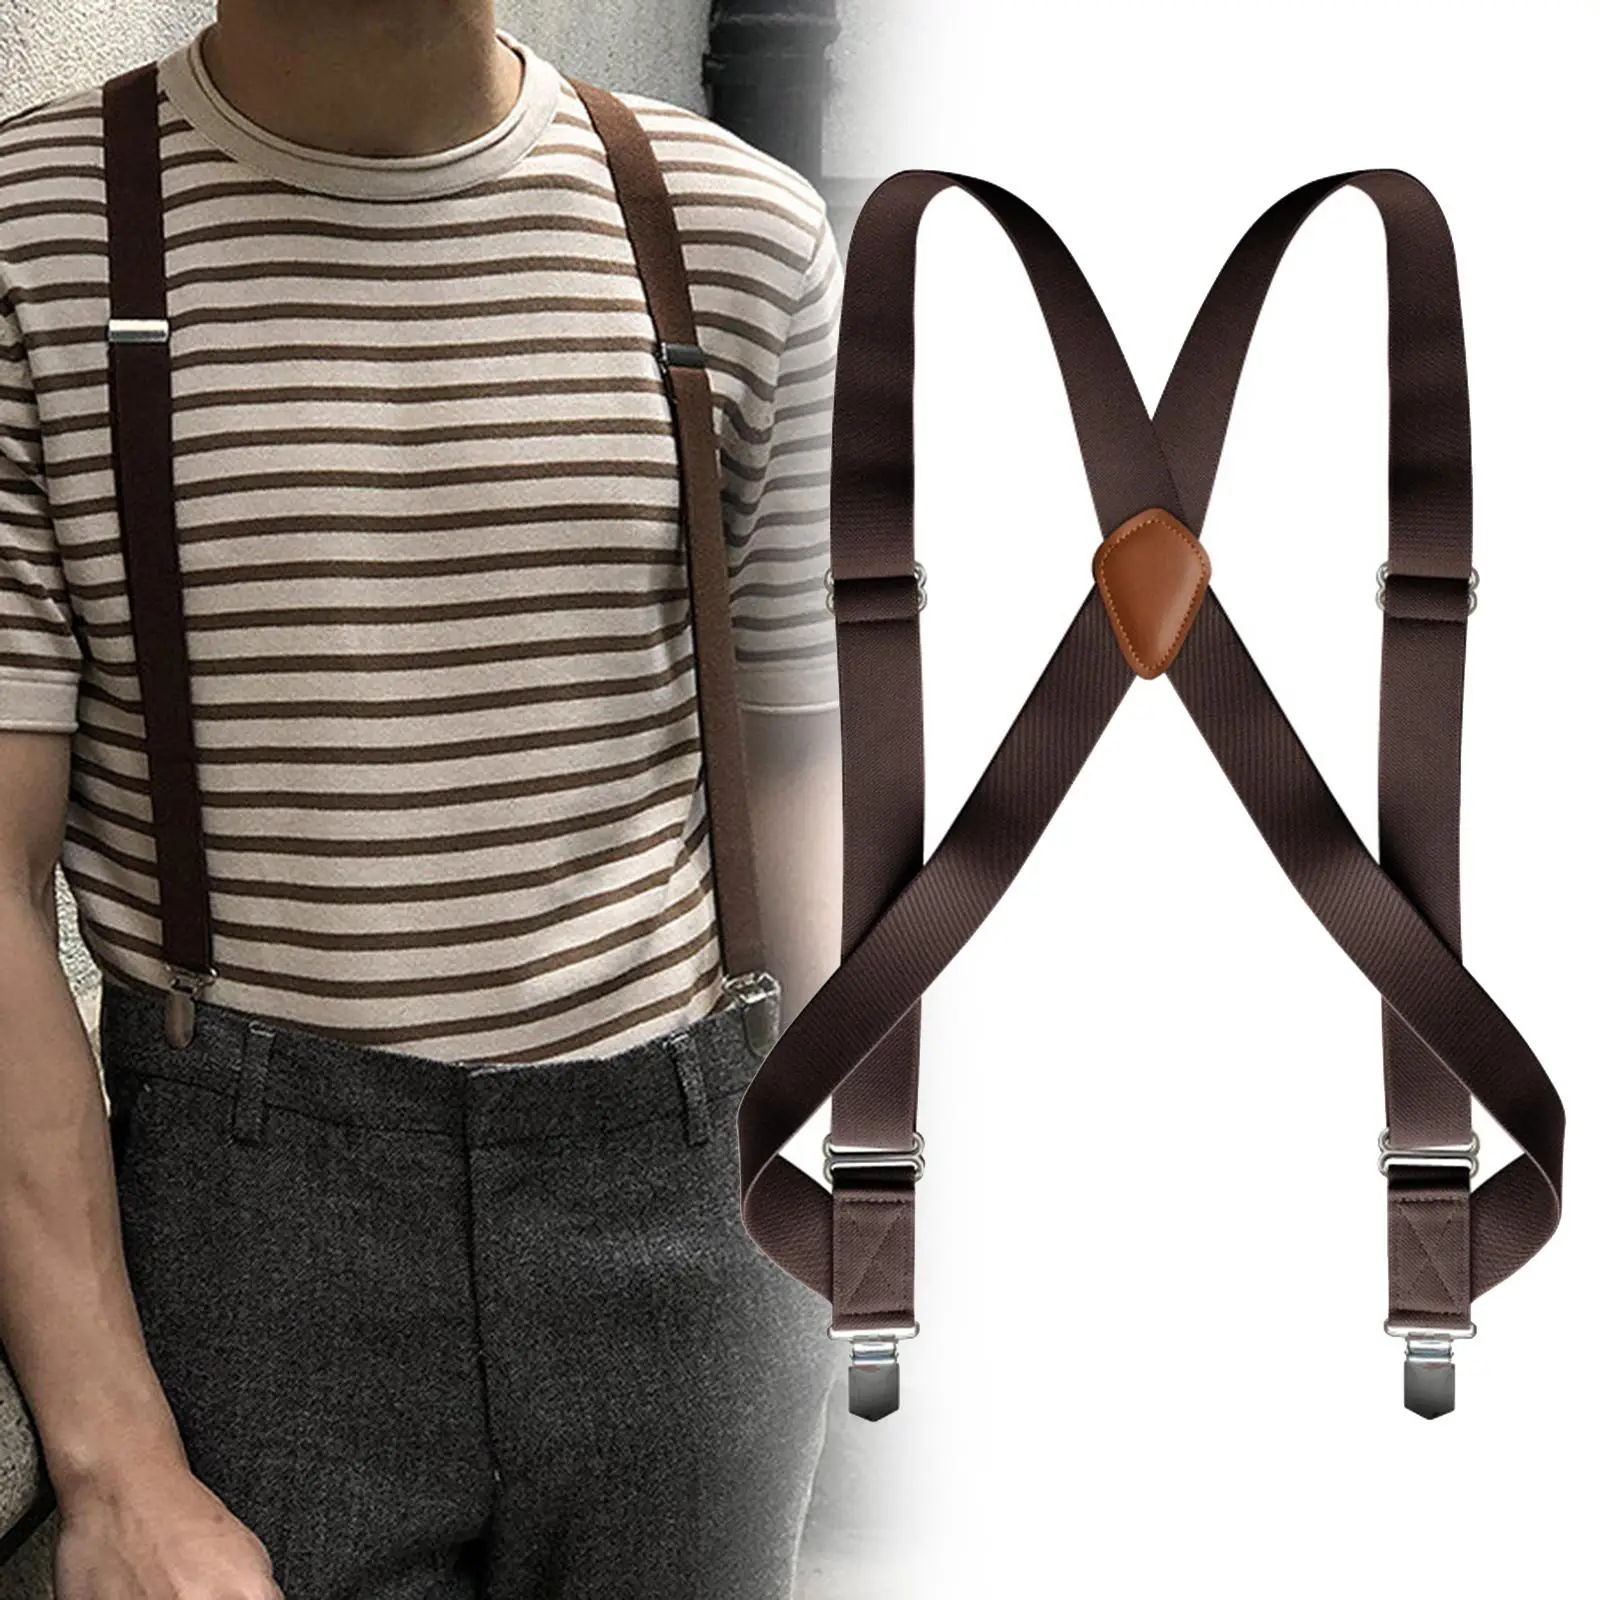 Mens Suspender with Clips Casual Washable Pants Holder Reusable Elastic Straps for Orchestra Friends Choir Trousers Suit Pants